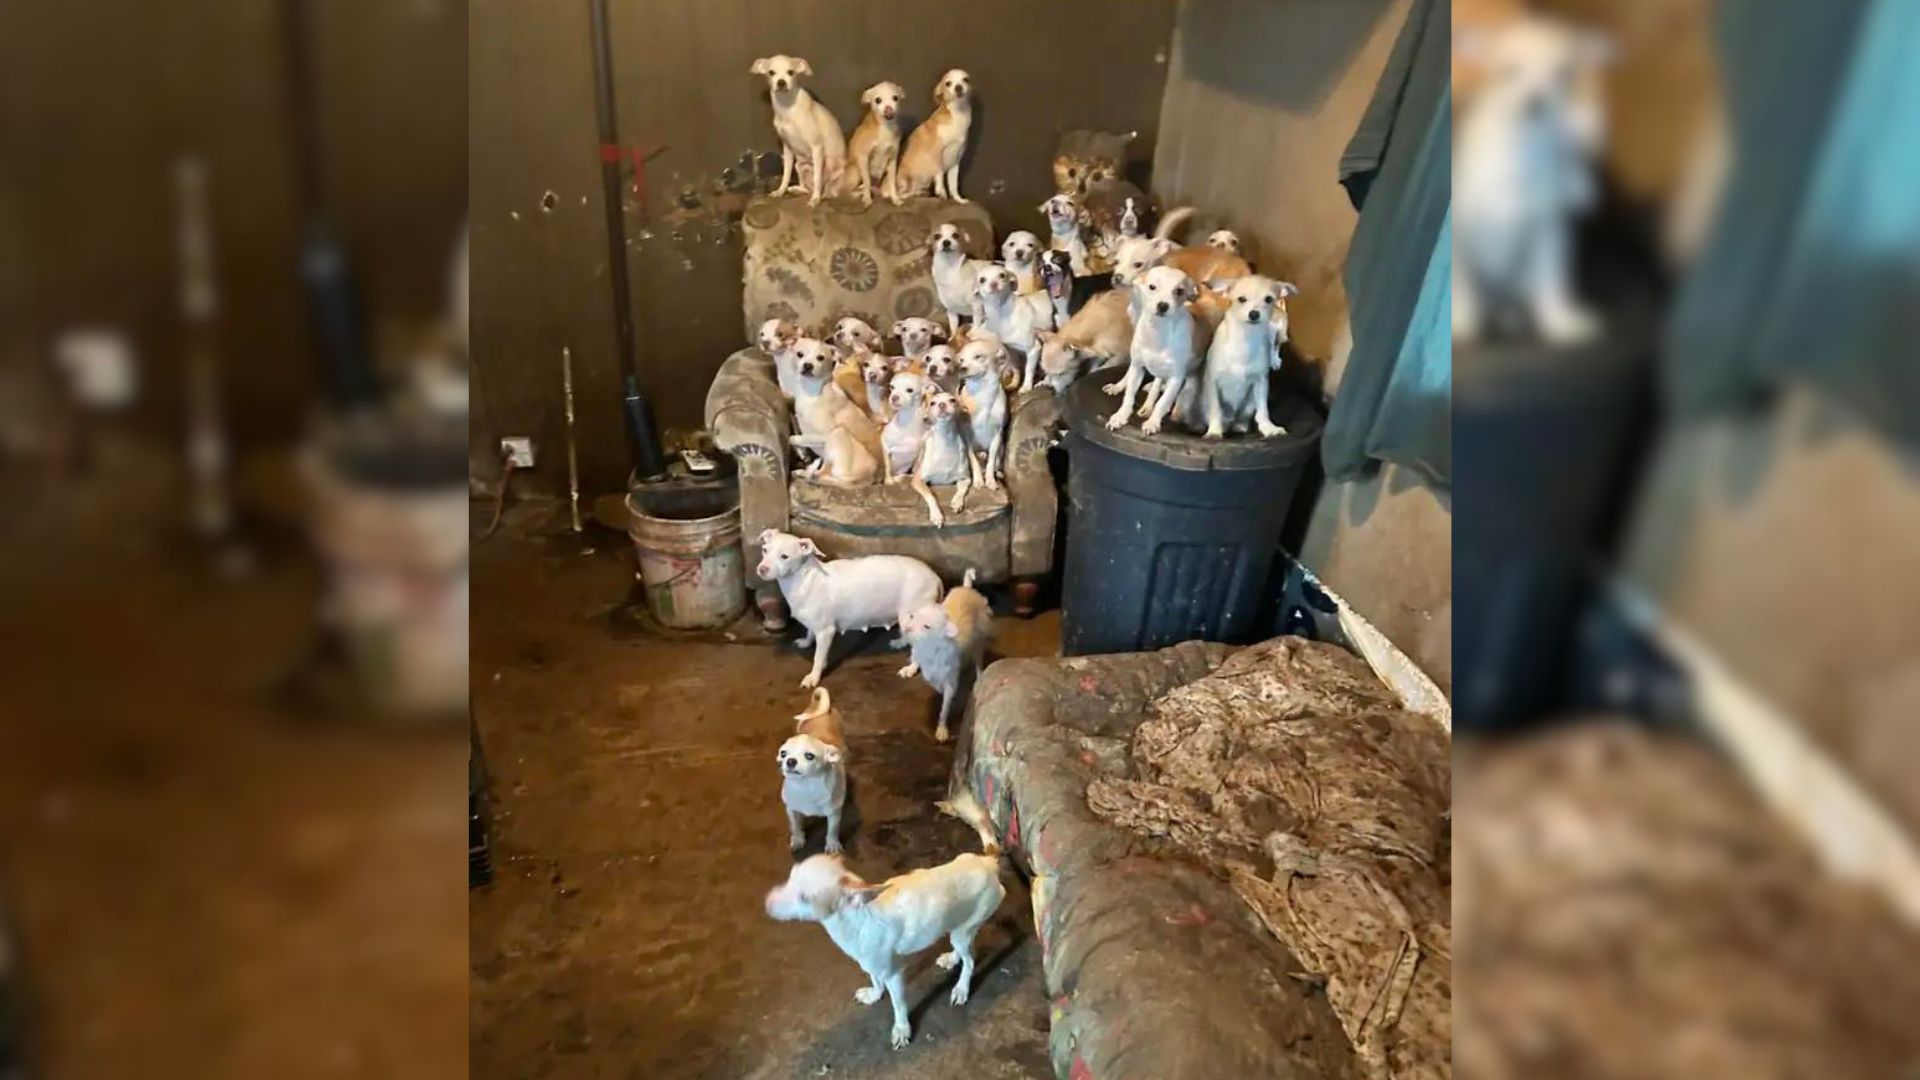 Rescuers From Pennsylvania Were Shocked By How Many Animals They Found In This Mobile Home